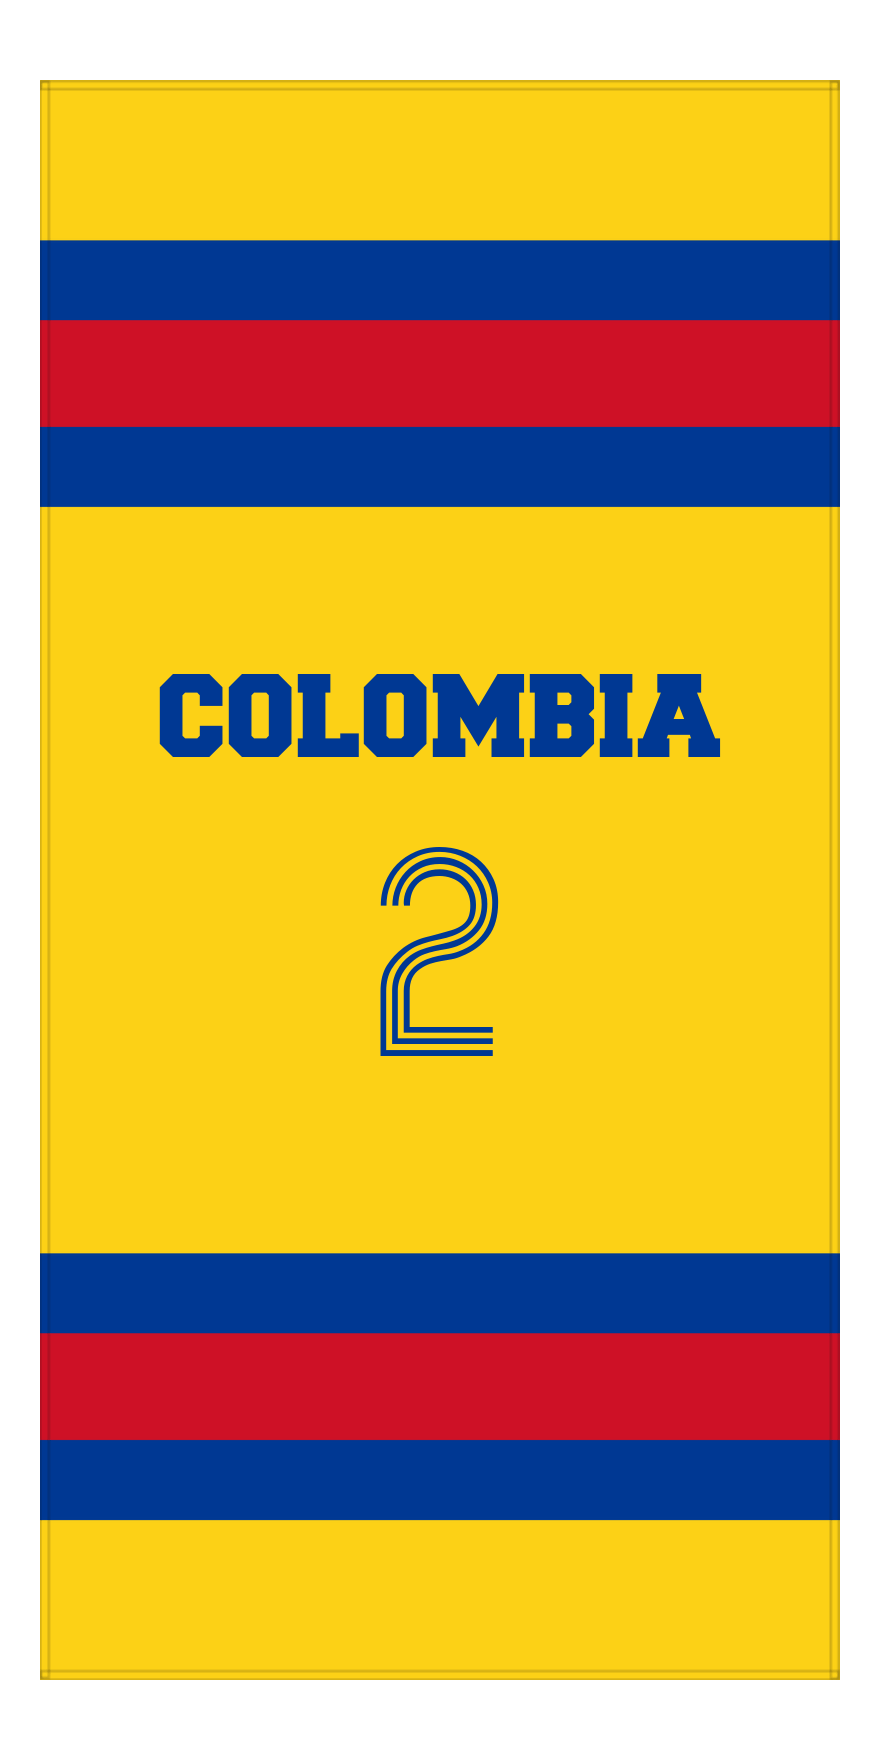 Personalized Jersey Number 1-on-1 Stripes Sports Beach Towel - Colombia - Vertical Design - Front View